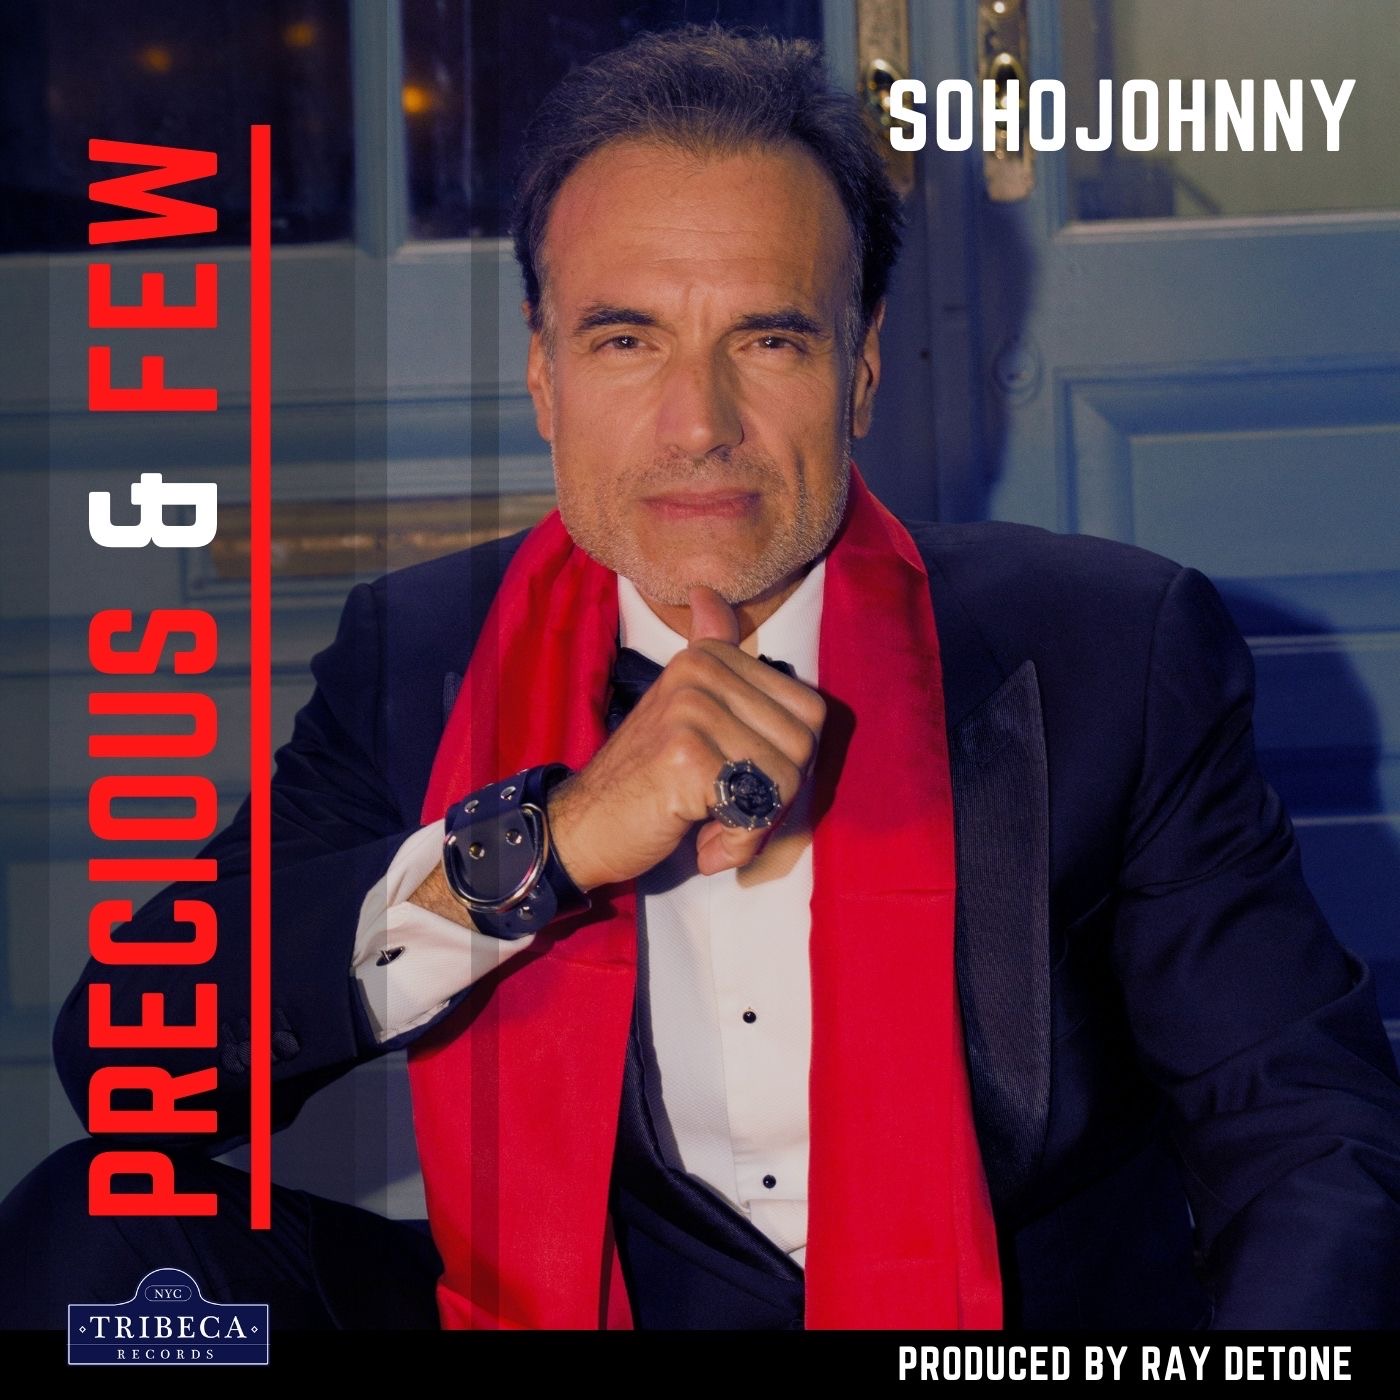 SohoJohnny Releases Music Video For Debut Single "Precious & Few" Just In Time For Valentine’s Day 